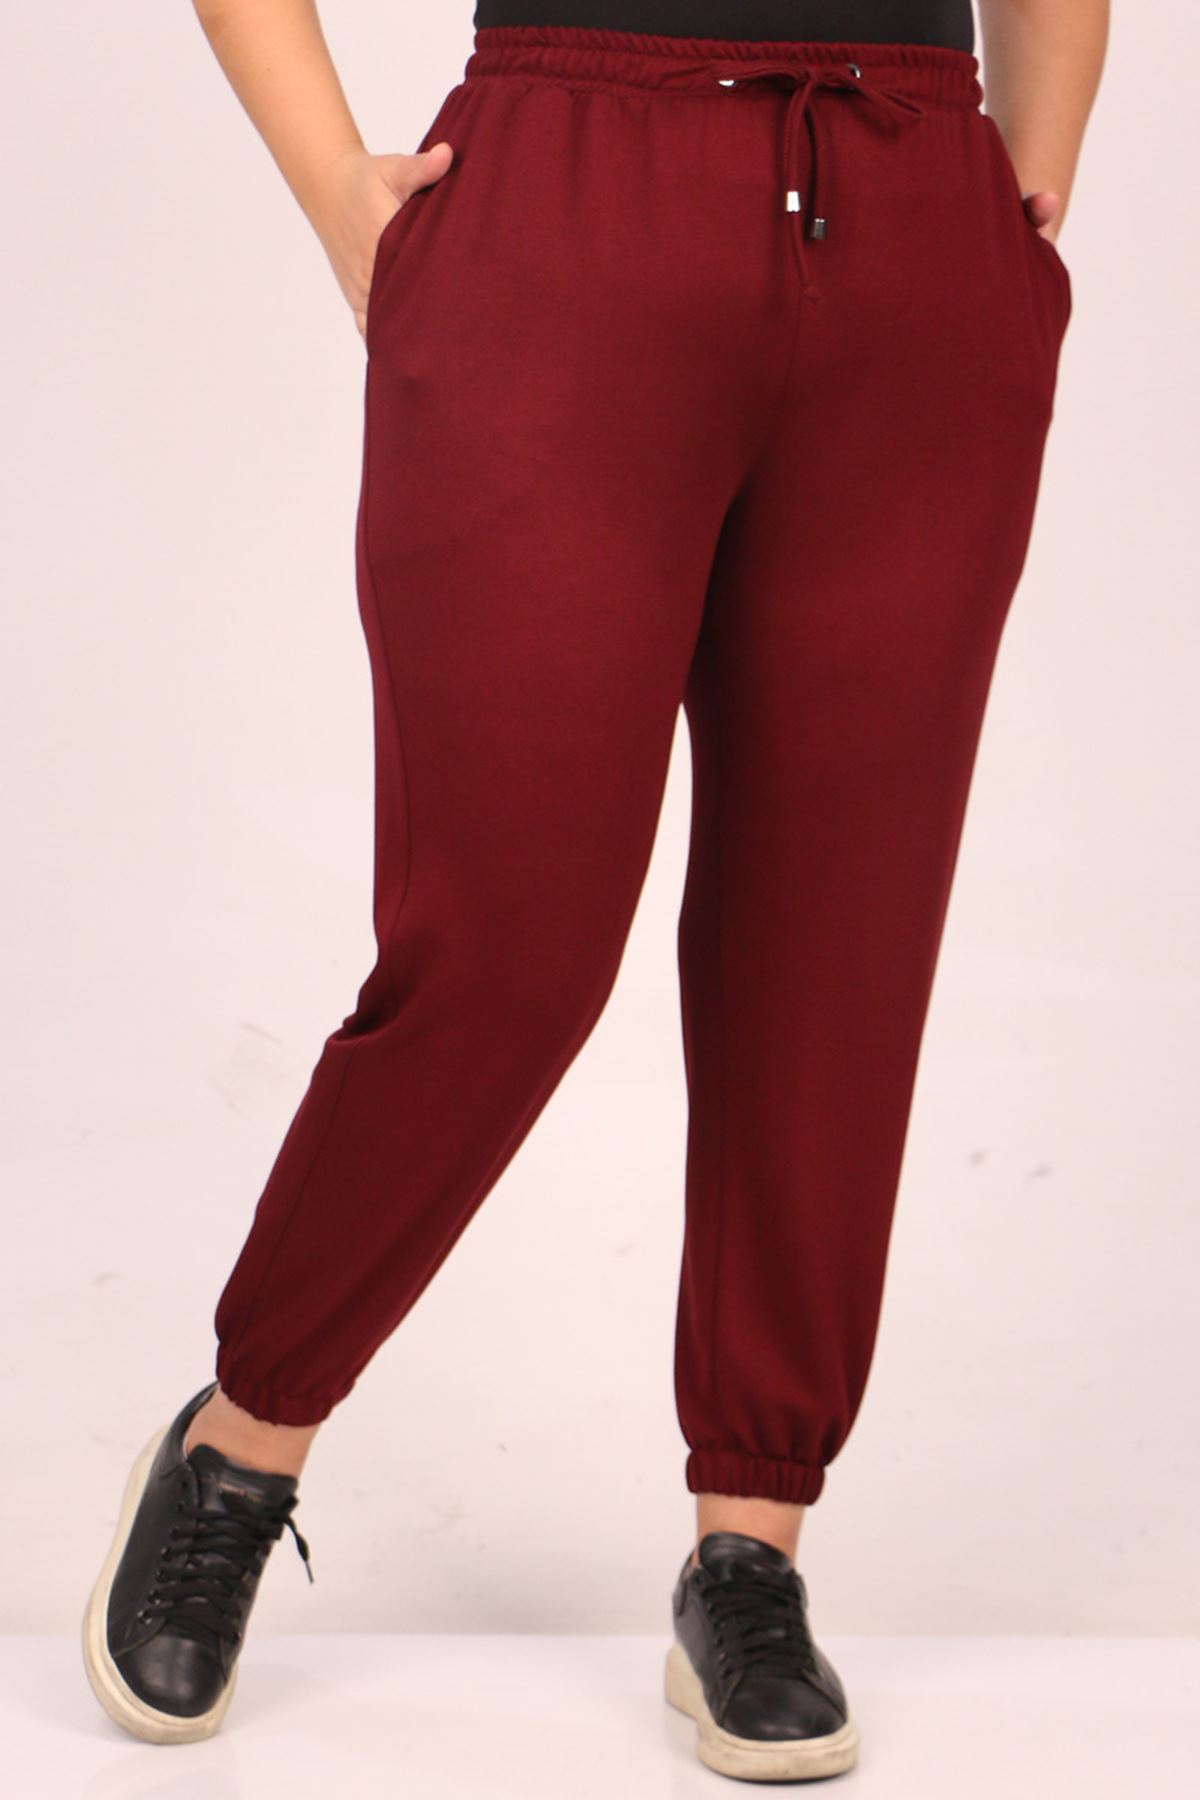 39501 Large Size Crystal Two Thread Elastic Sweatpants-Claret Red